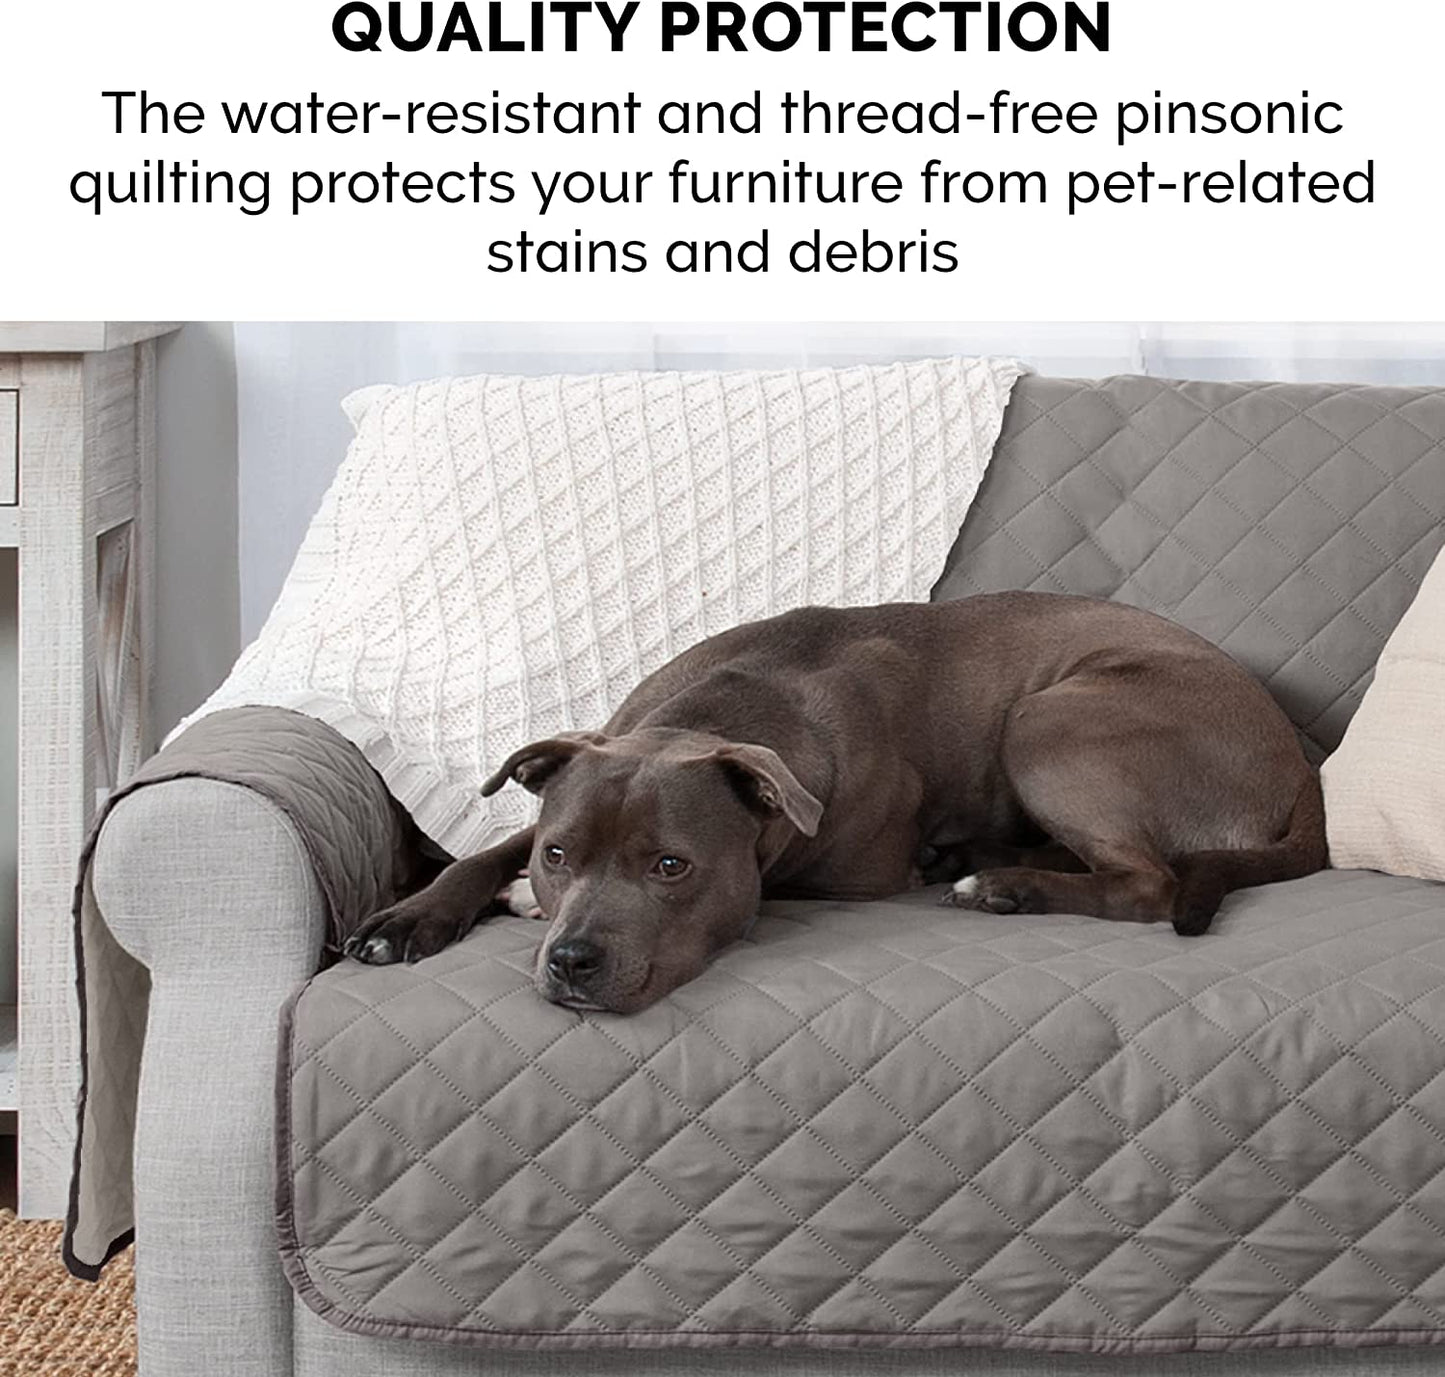 Furniture Cover for Dogs and Cats - Water-Resistant Living Room Furniture Protector for Chairs, Recliners, Loveseats, & Sofas - Multiple Colors, Sizes, & Styles